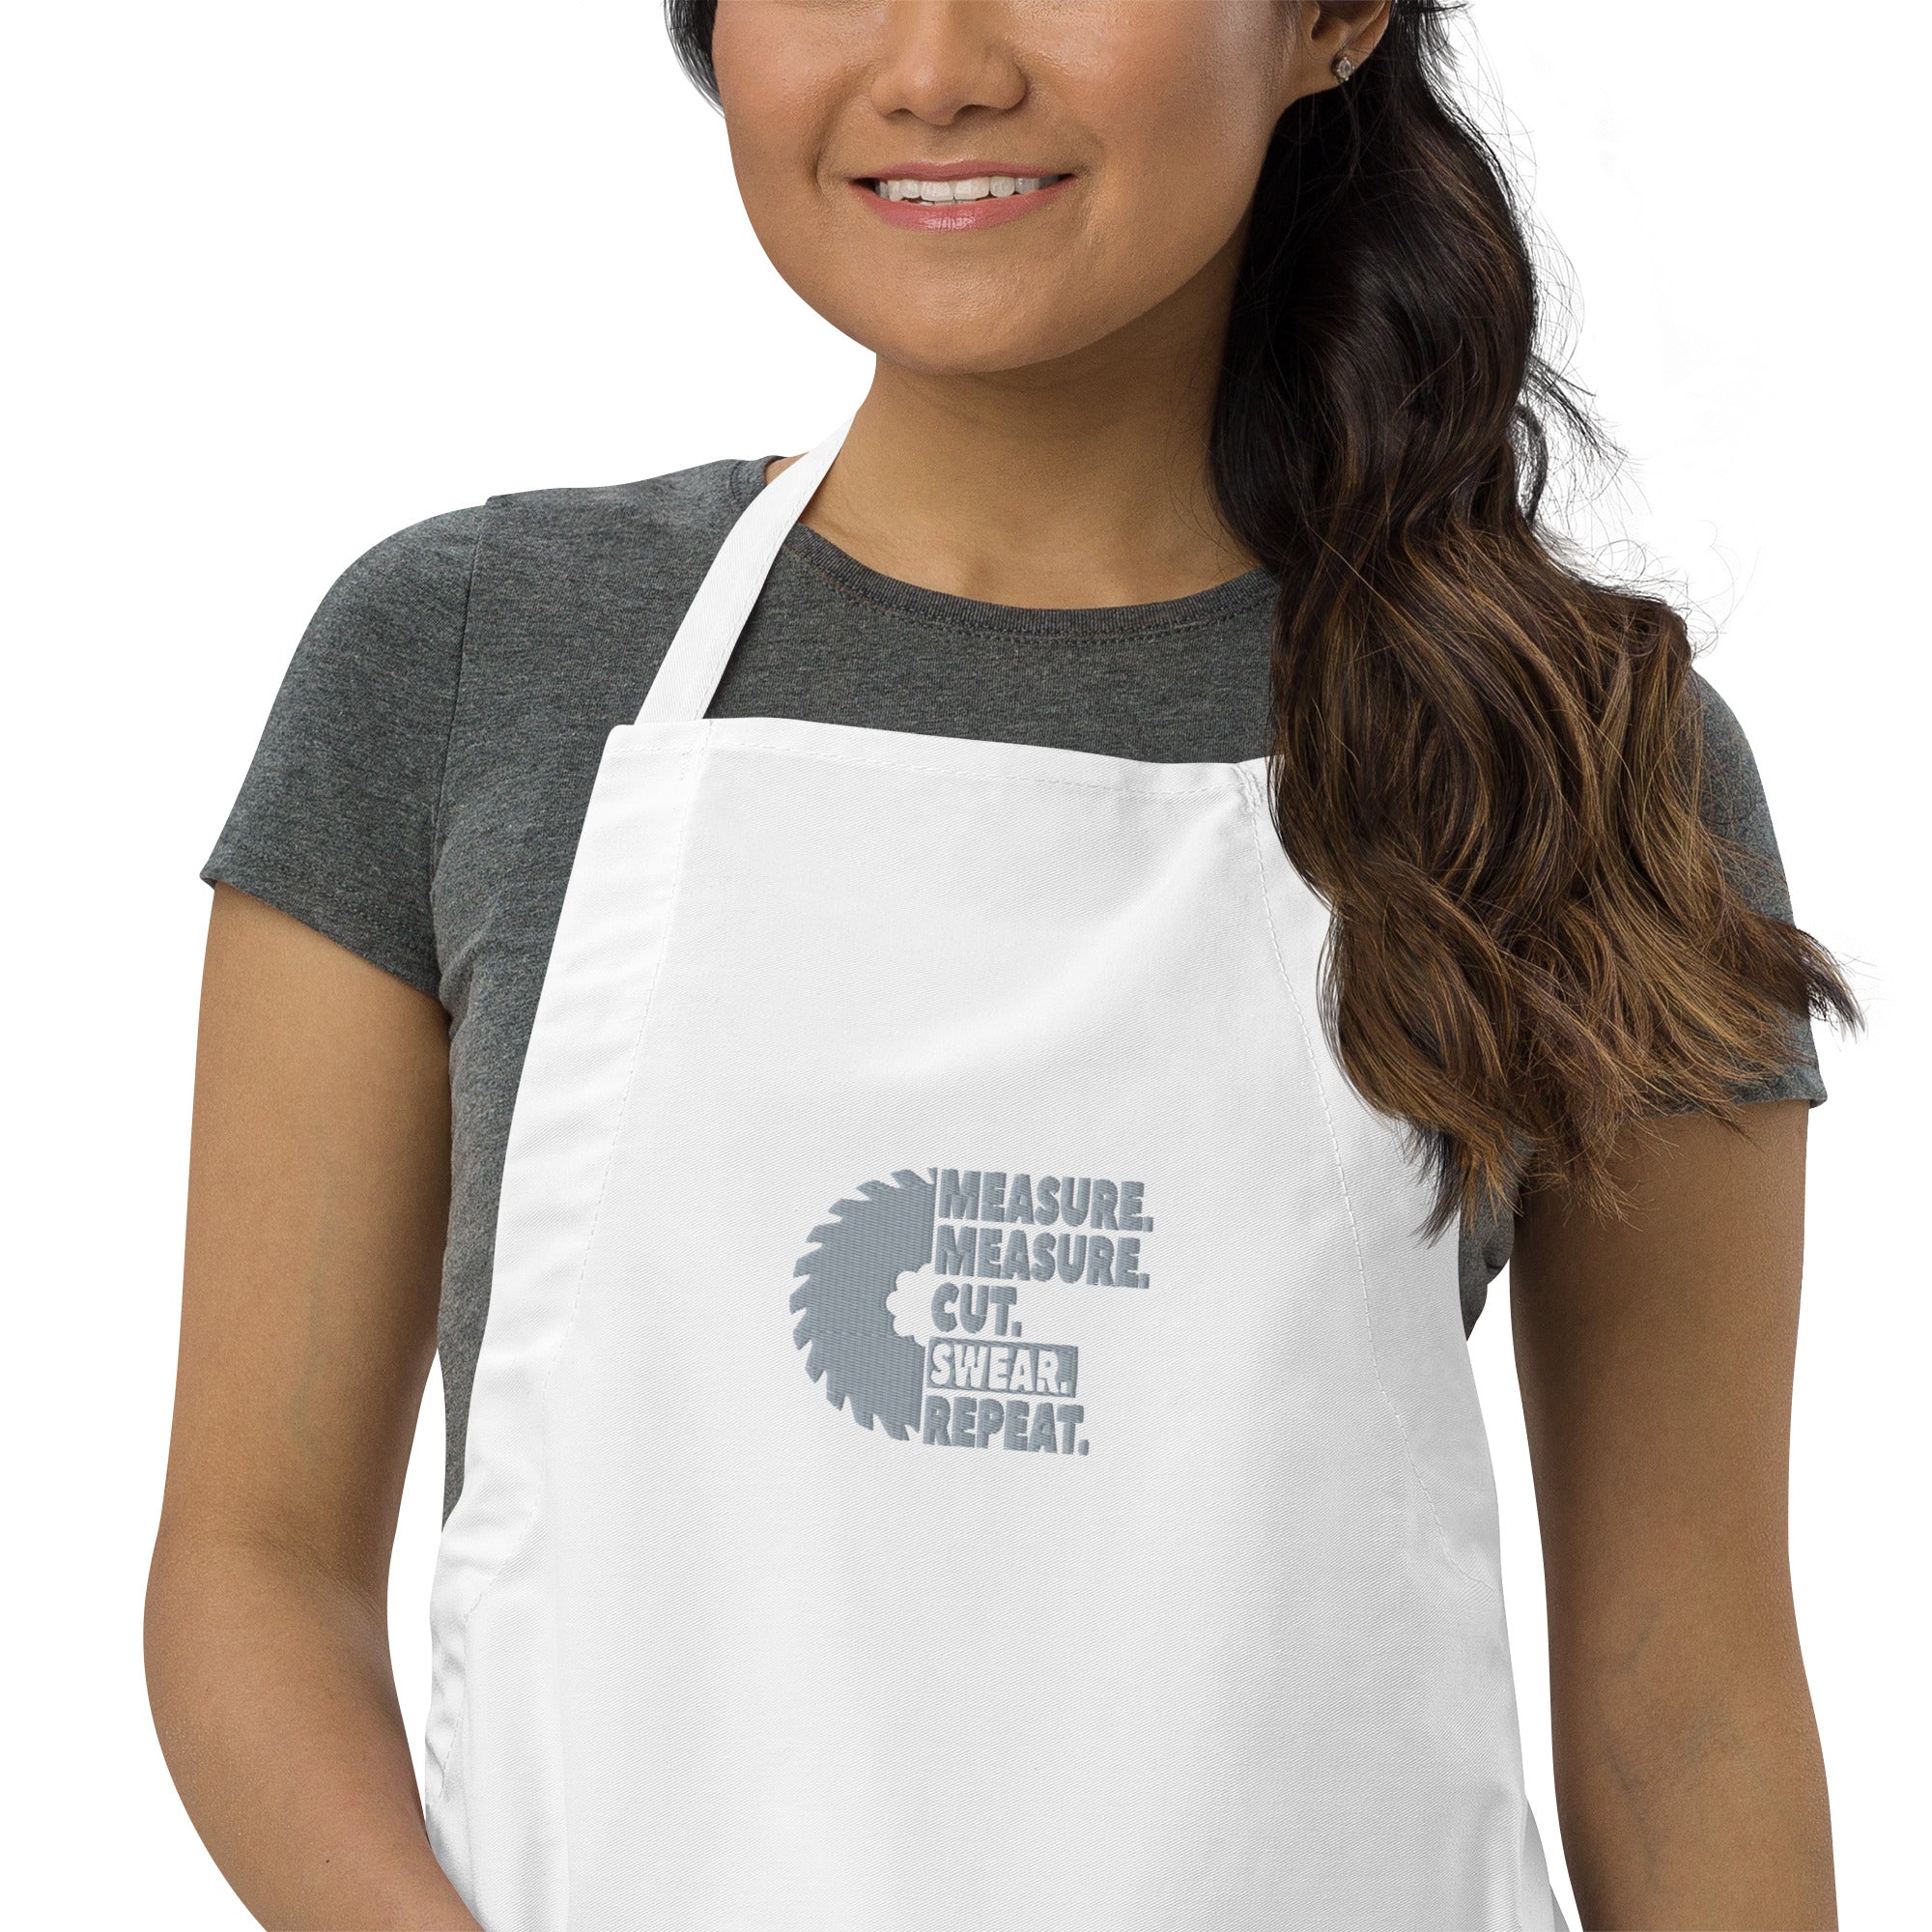 Measure Embroidered Apron